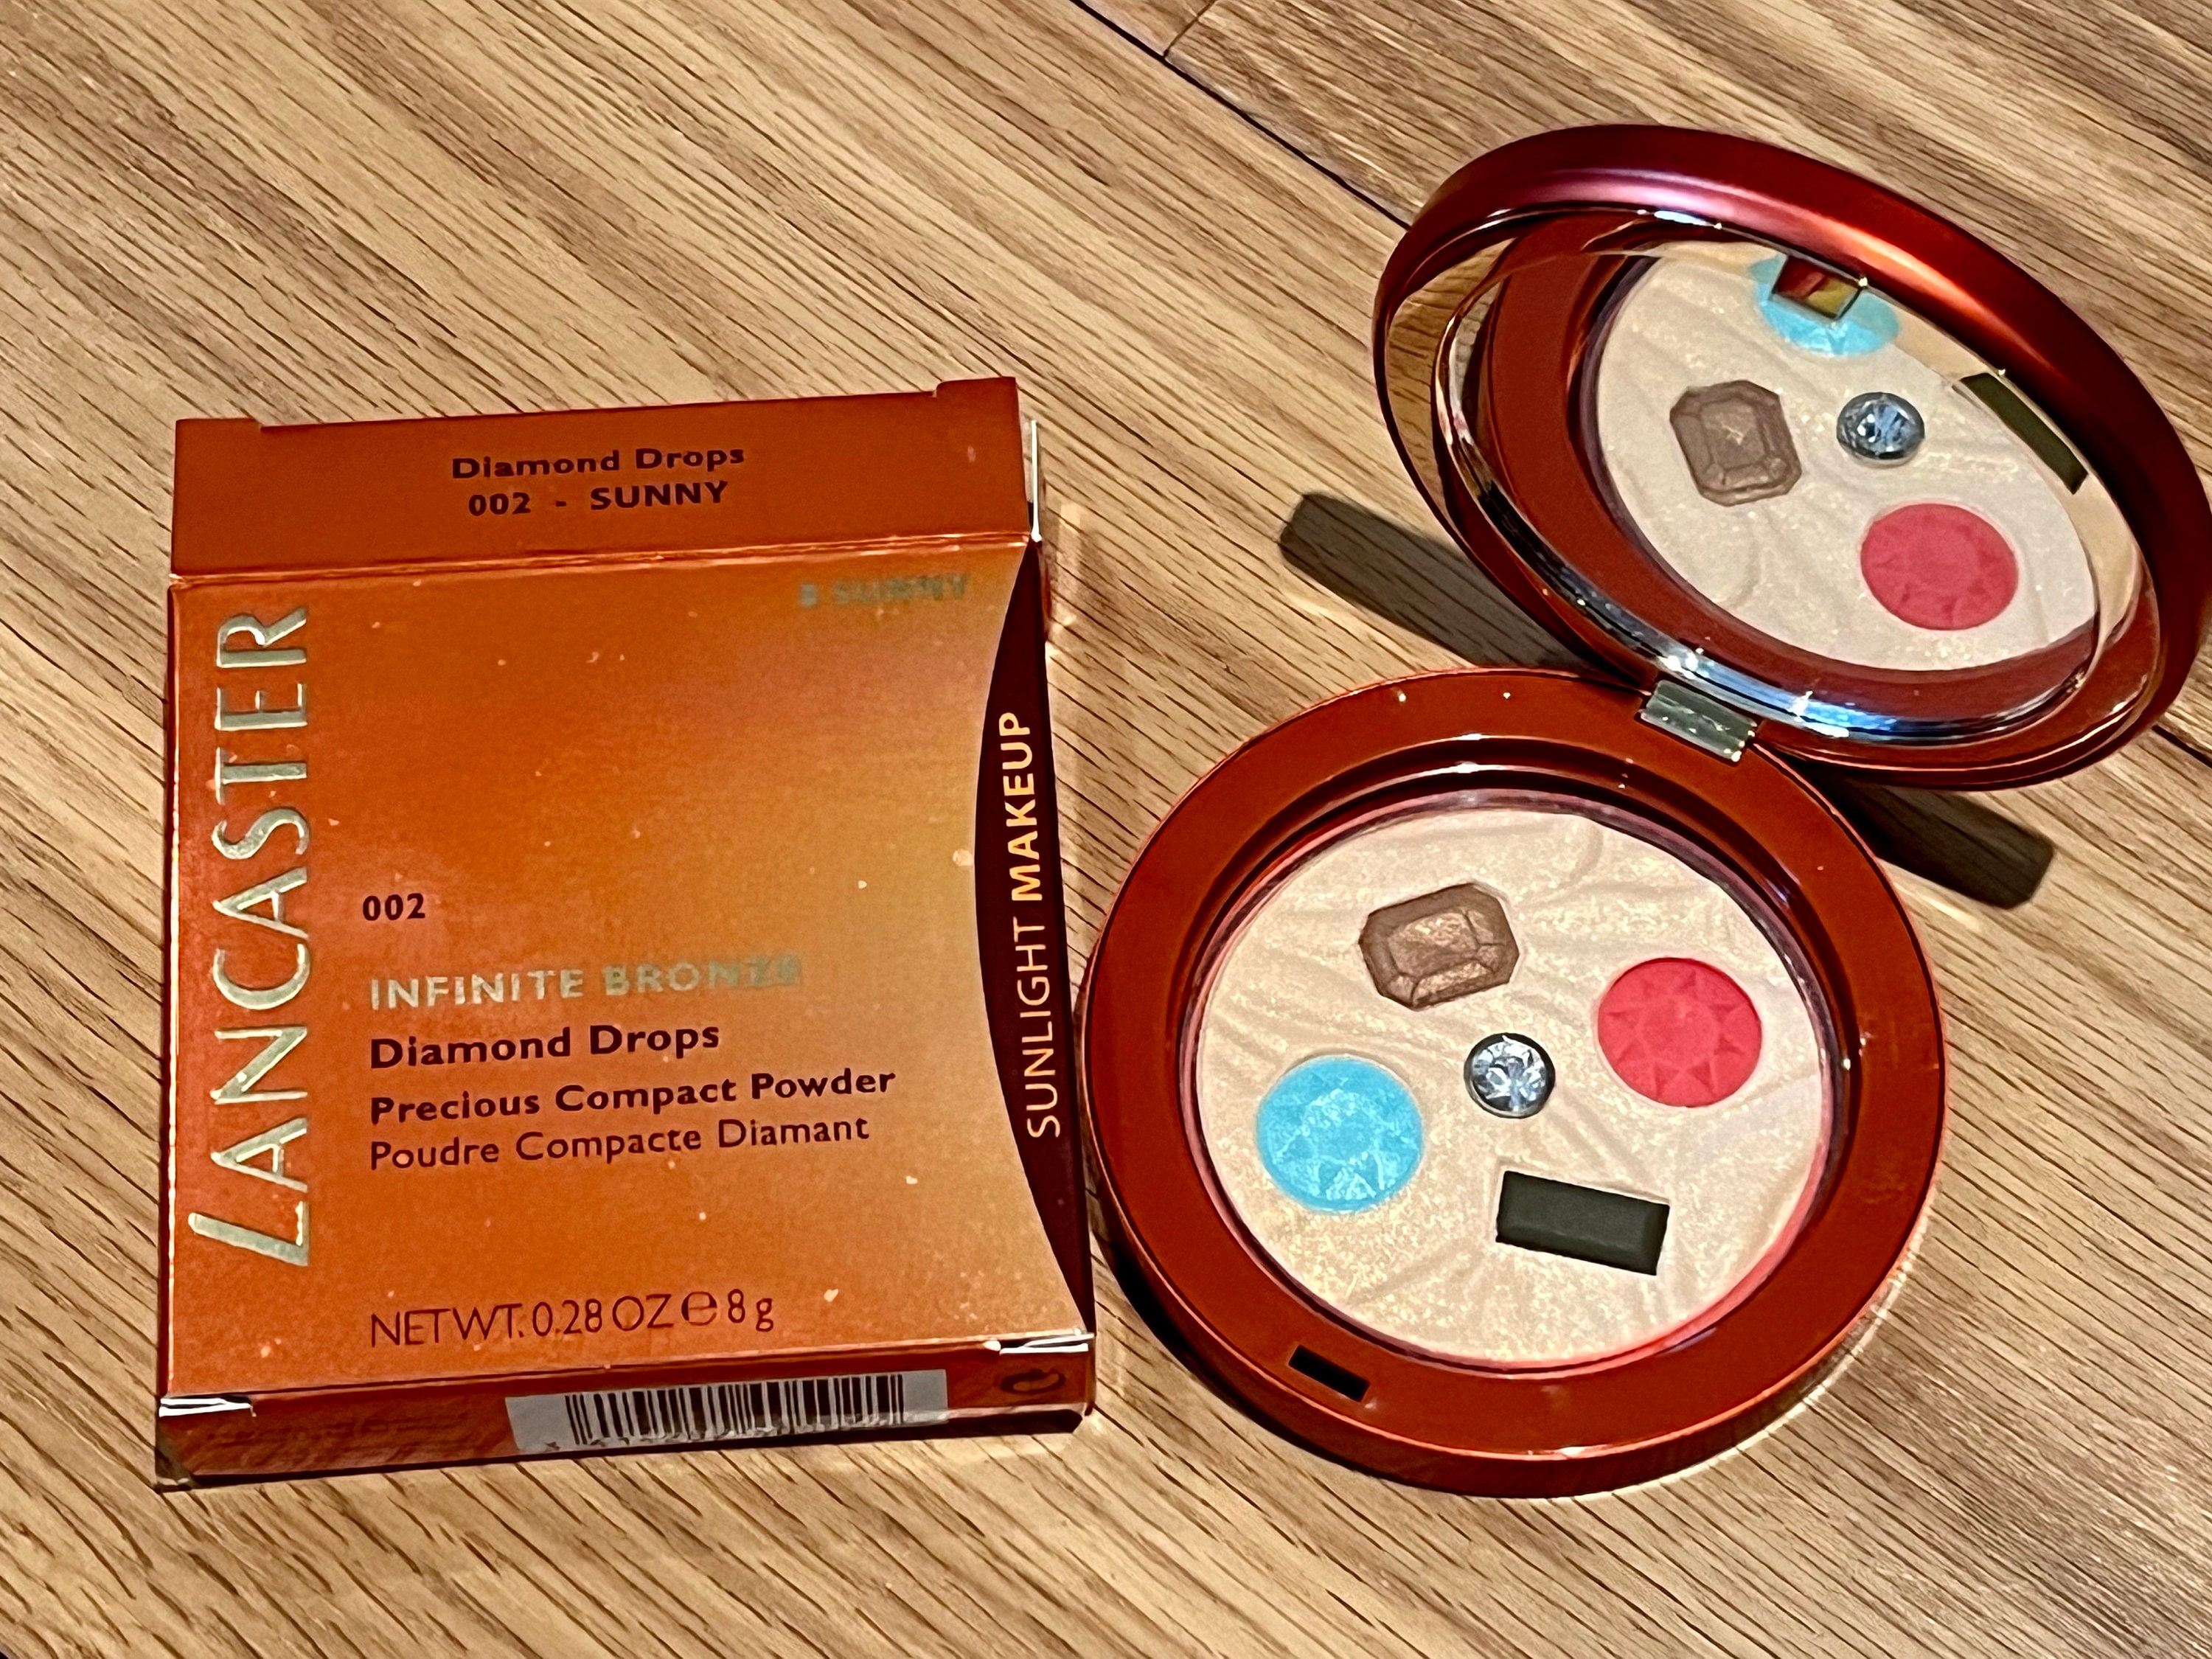 Ben Nye Neutral Set Powder/theater Quality Setting Powder/ Available in 2  Sizes 